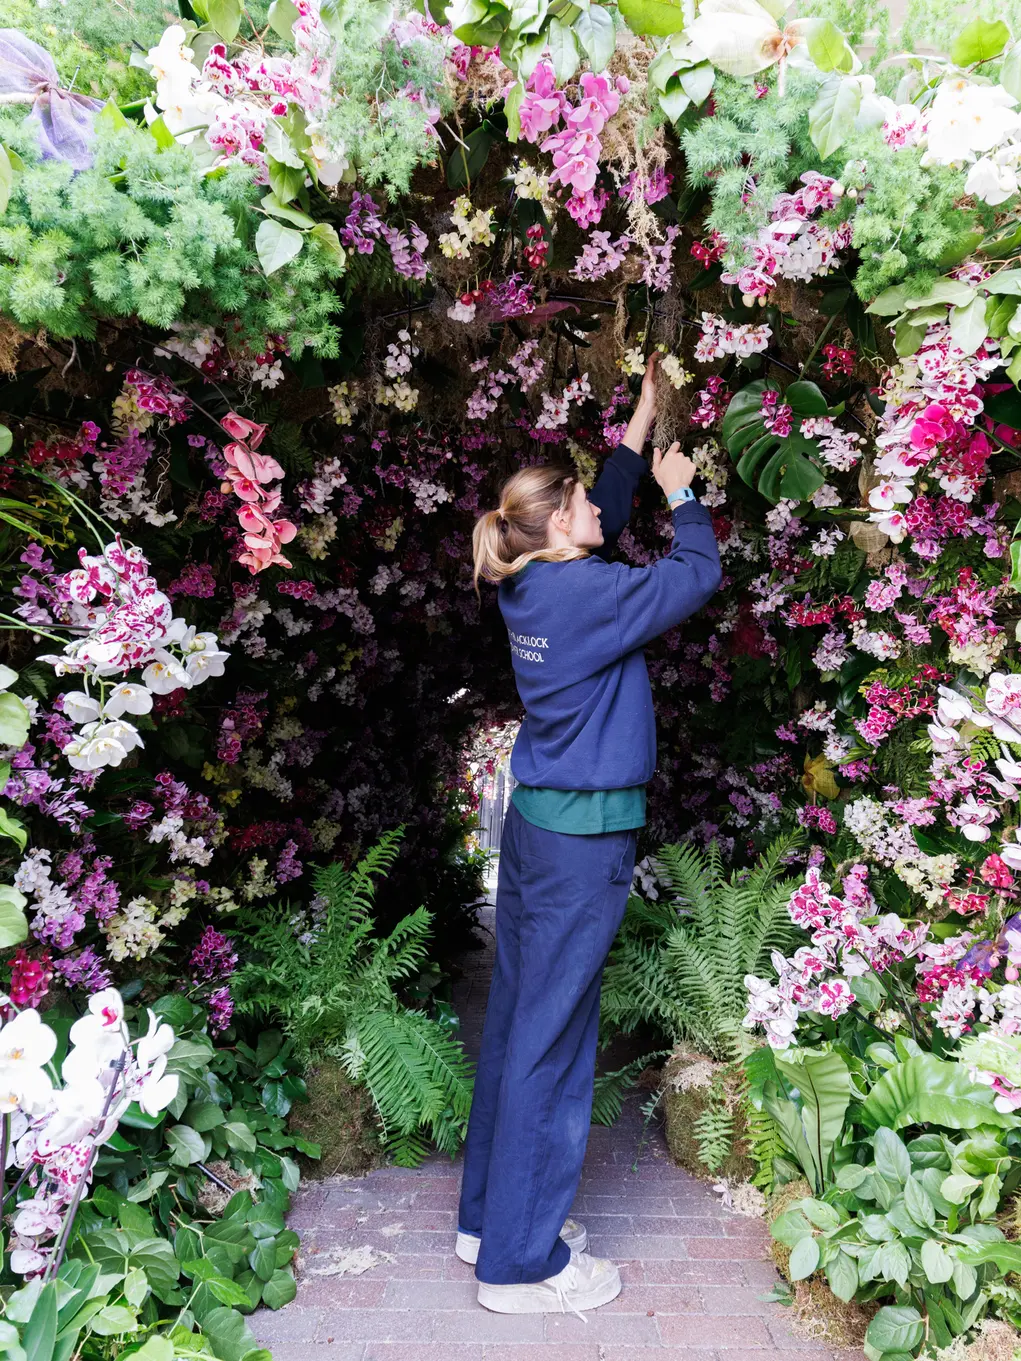 Florist puts finishing touches to a floral archway